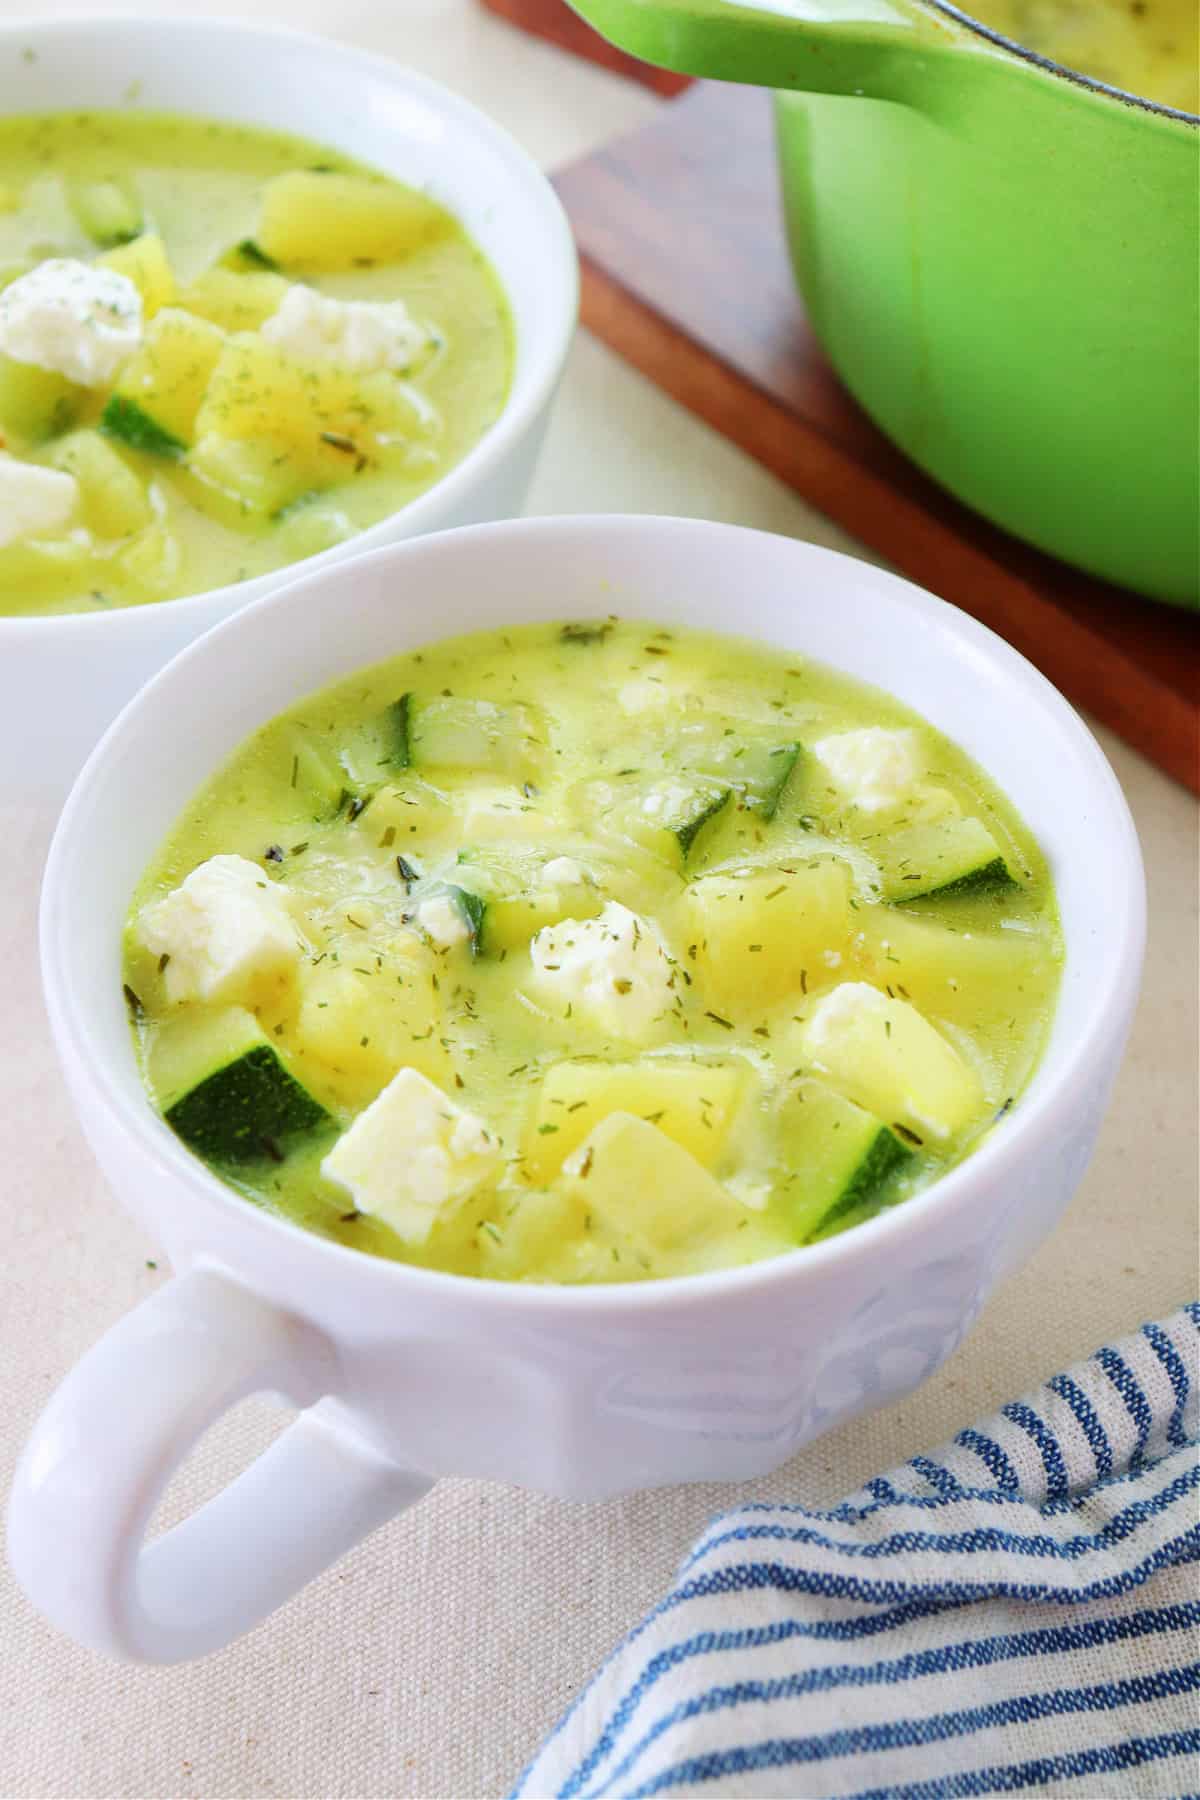 Soup with zucchini in two bowls.